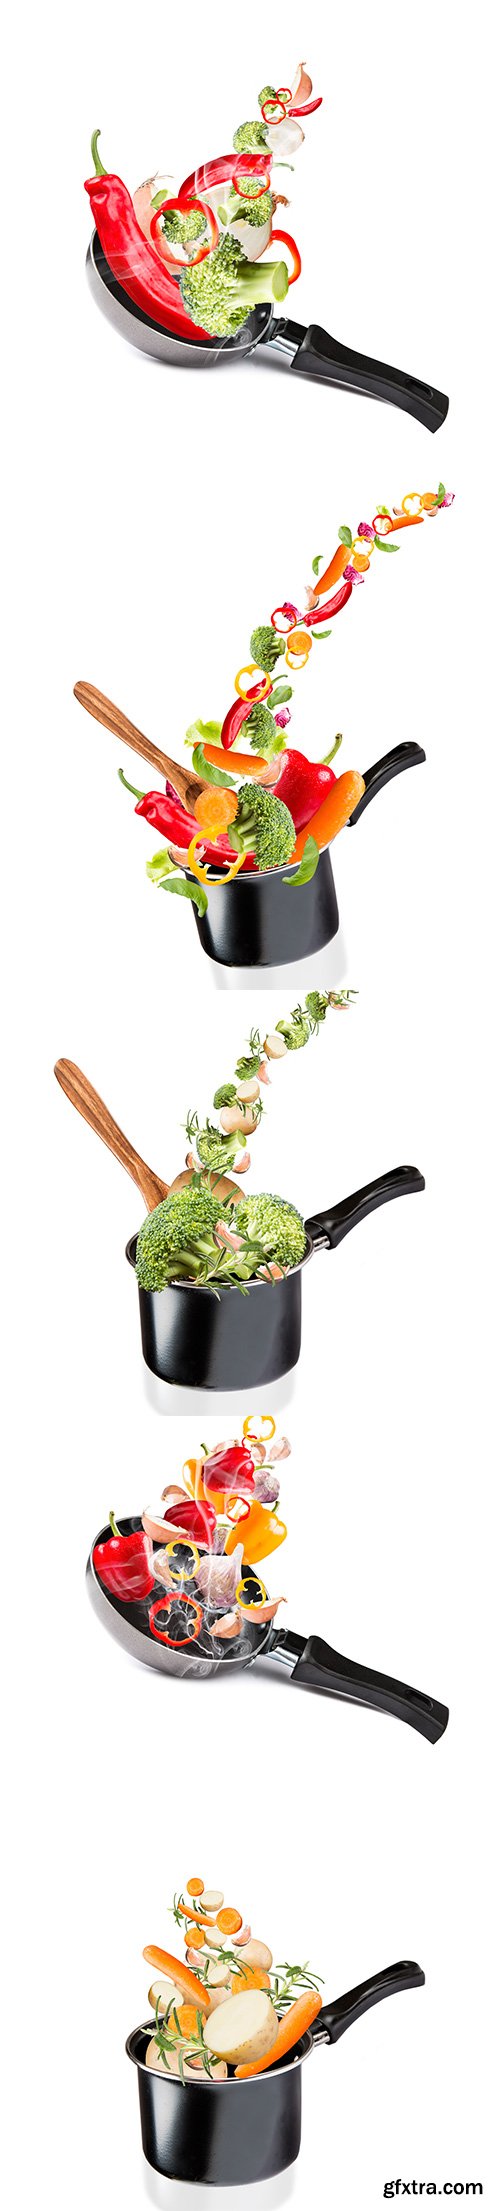 Frying Pan With Flying Vegetables Isolated - 9xJPGs